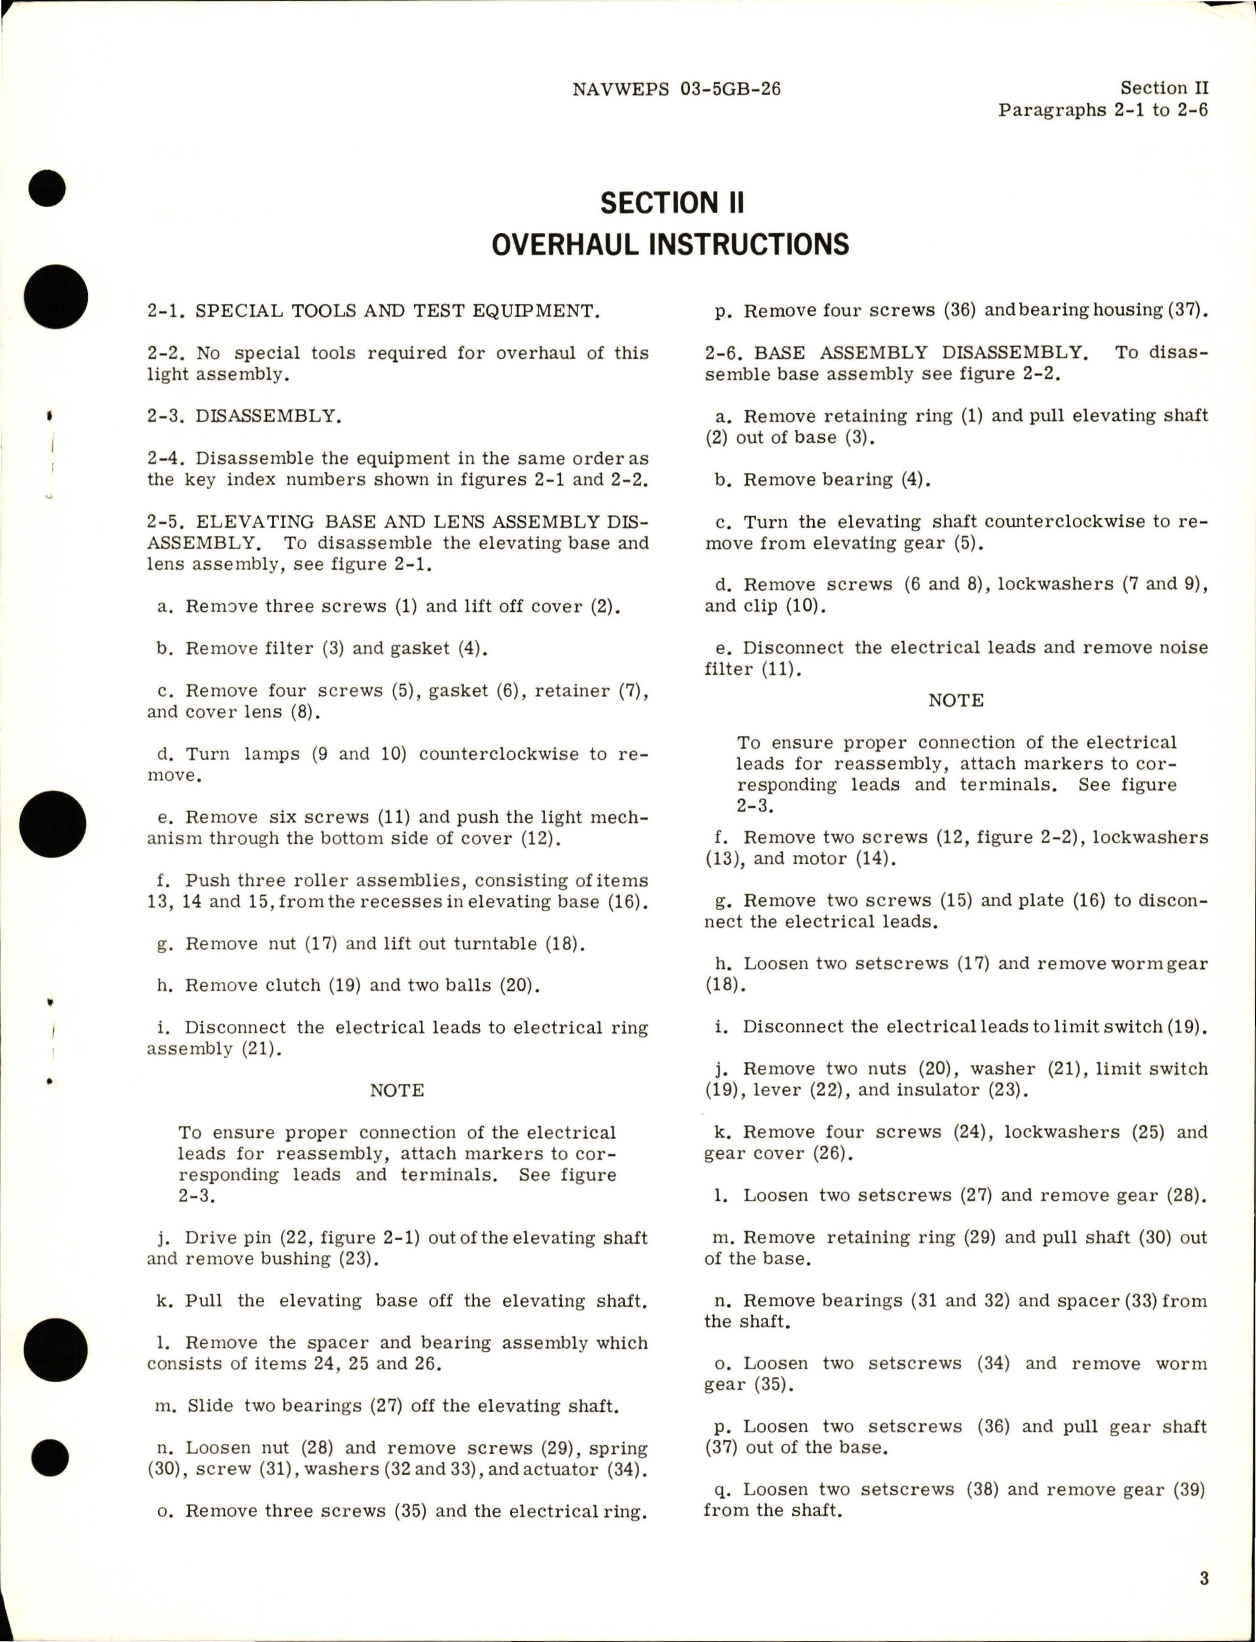 Sample page 5 from AirCorps Library document: Overhaul Instructions for Retractable Rotating Anti-Collision Light Assembly - Part 40-0021-1